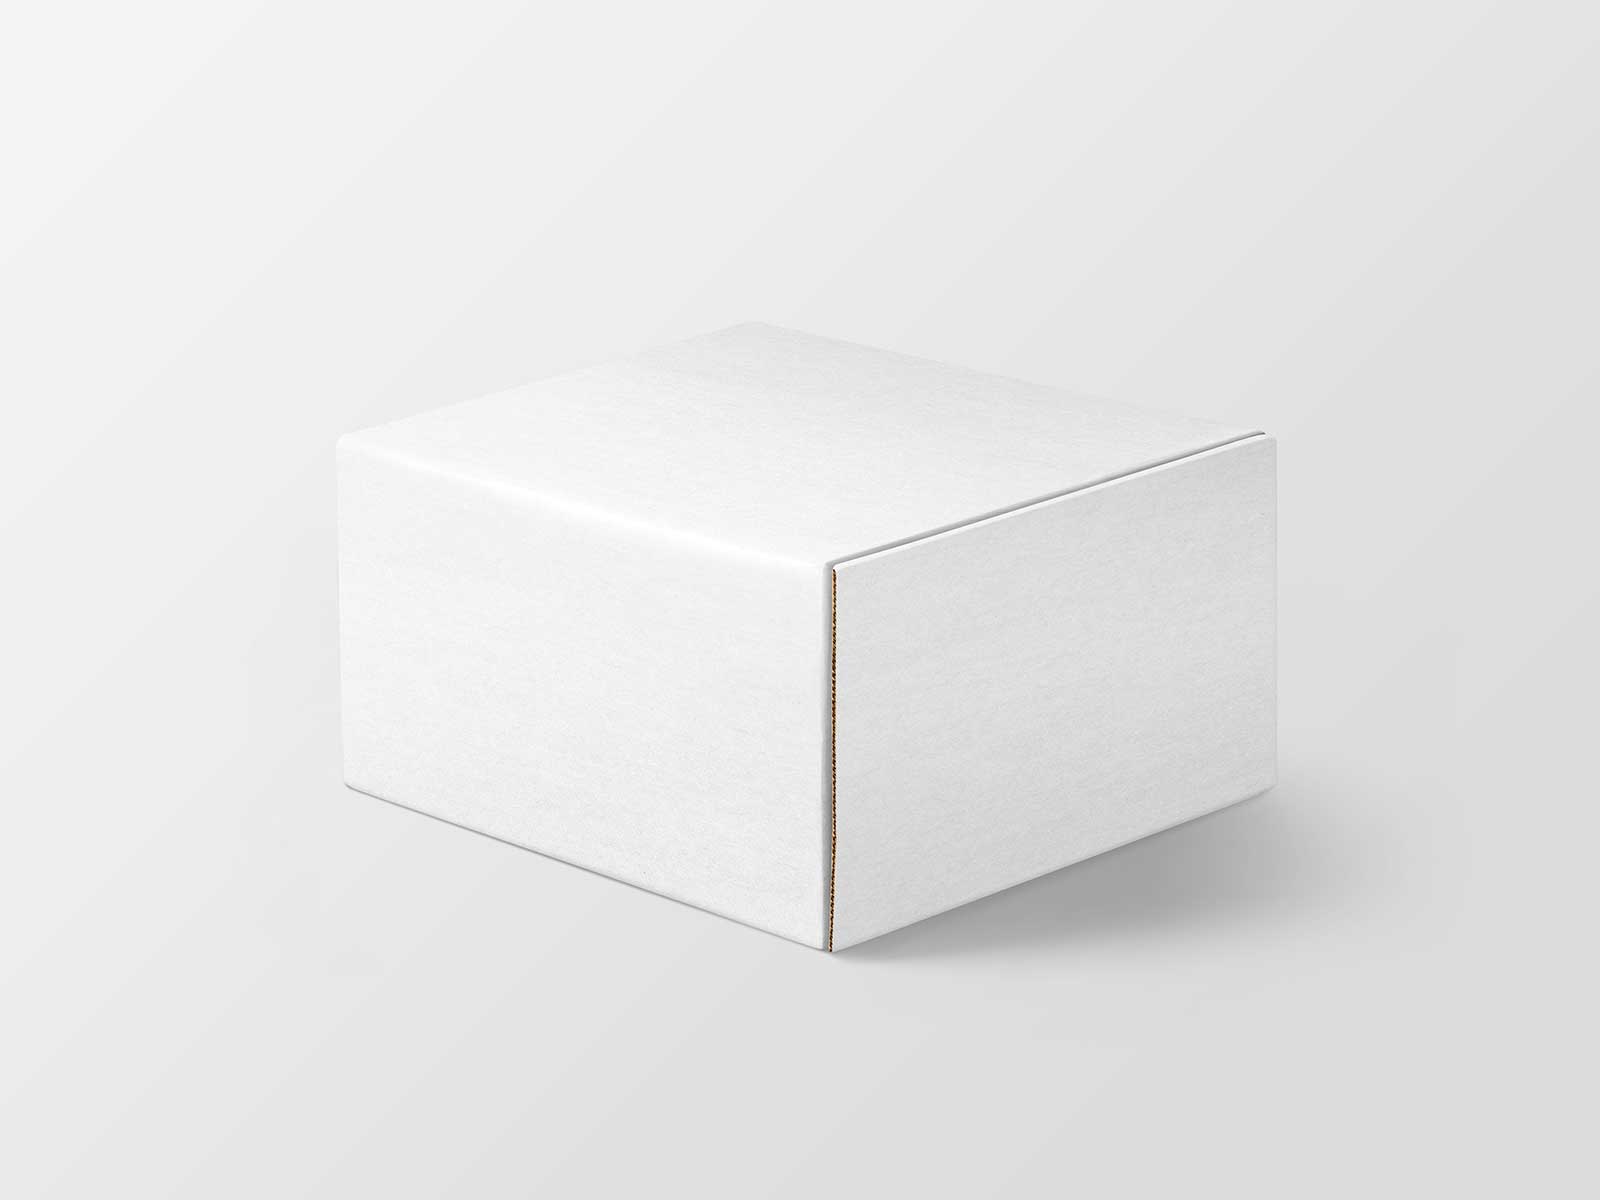 Free Mailing Delivery Box Mockup: Elevate Your Packaging Presentation